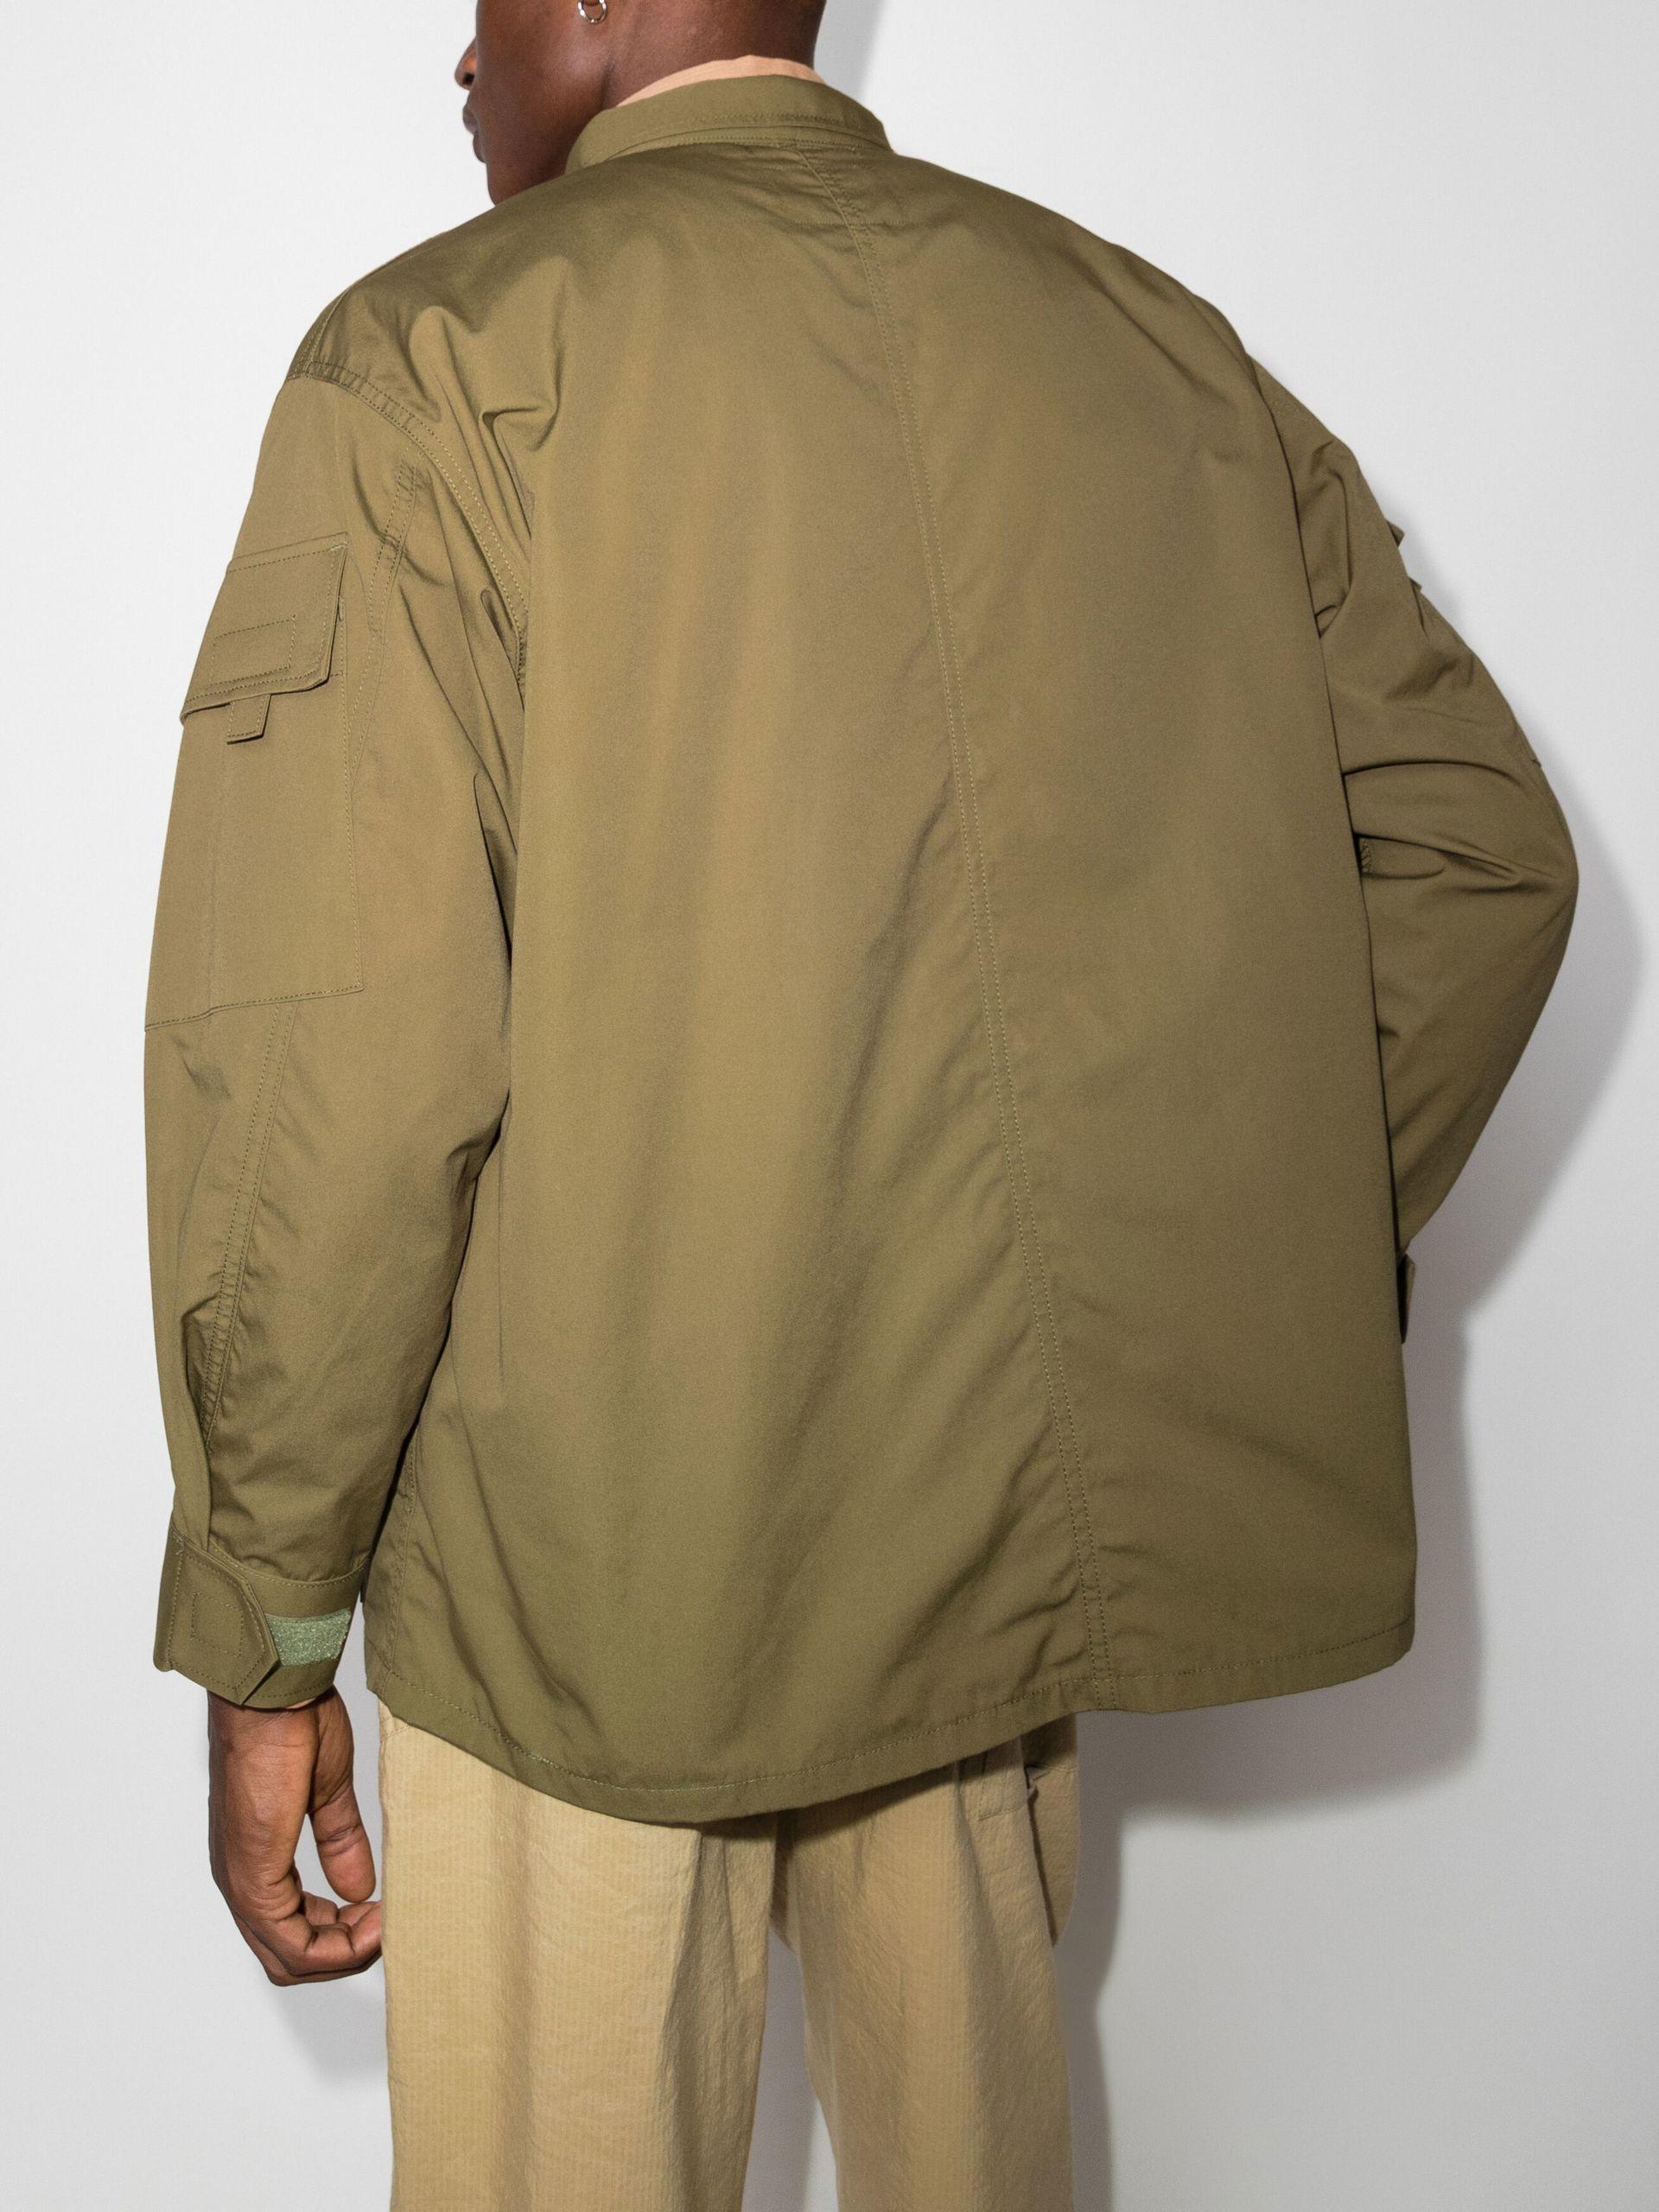 WTAPS Men's Green Conceal Military Jacket